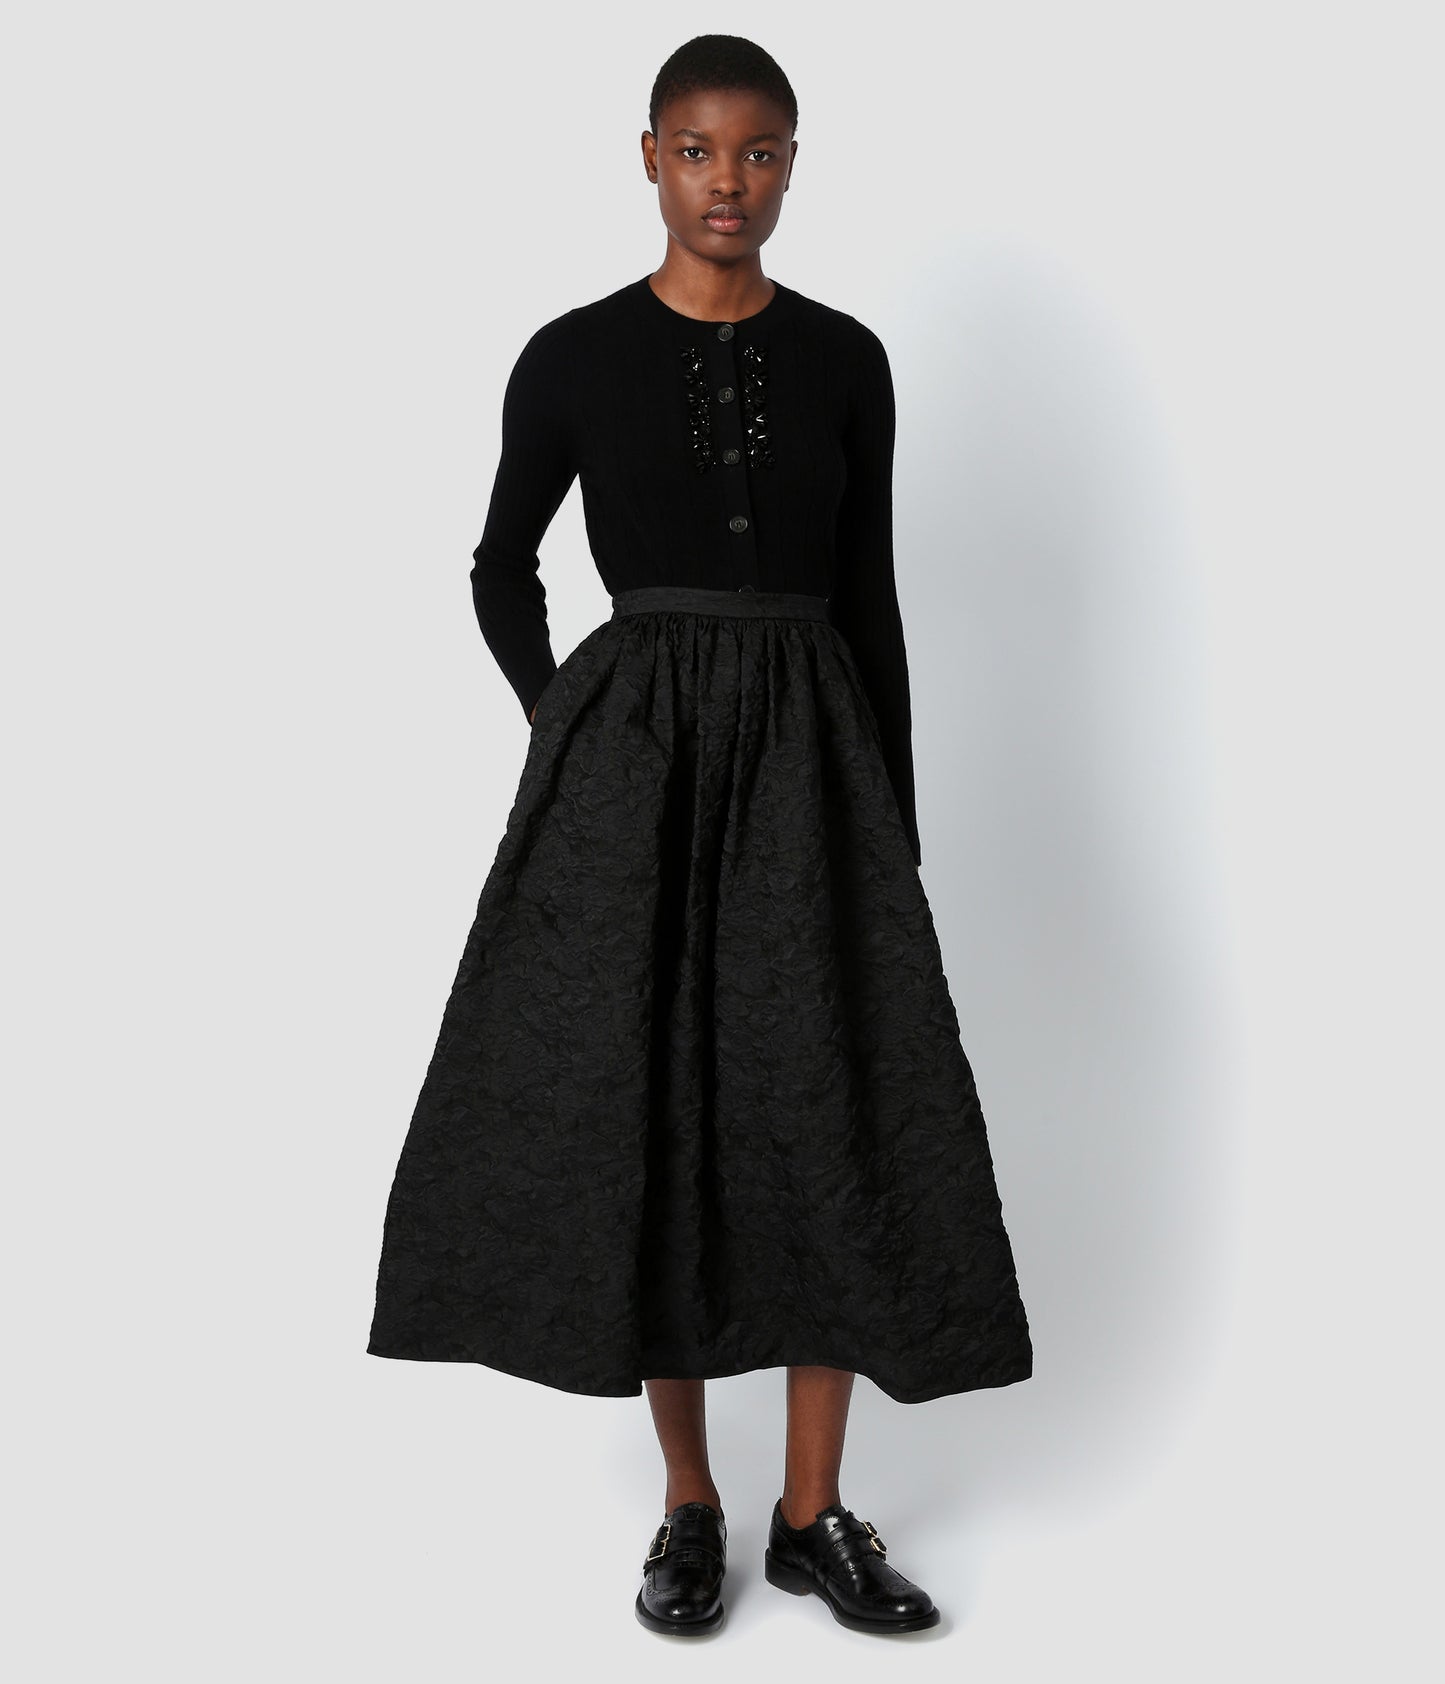 Black voluminous skirt made from structured cloque that is beautifully textured. The skirt is worn by a model who is using the pockets. The voluminous skirt is mid length, falling above the ankle.